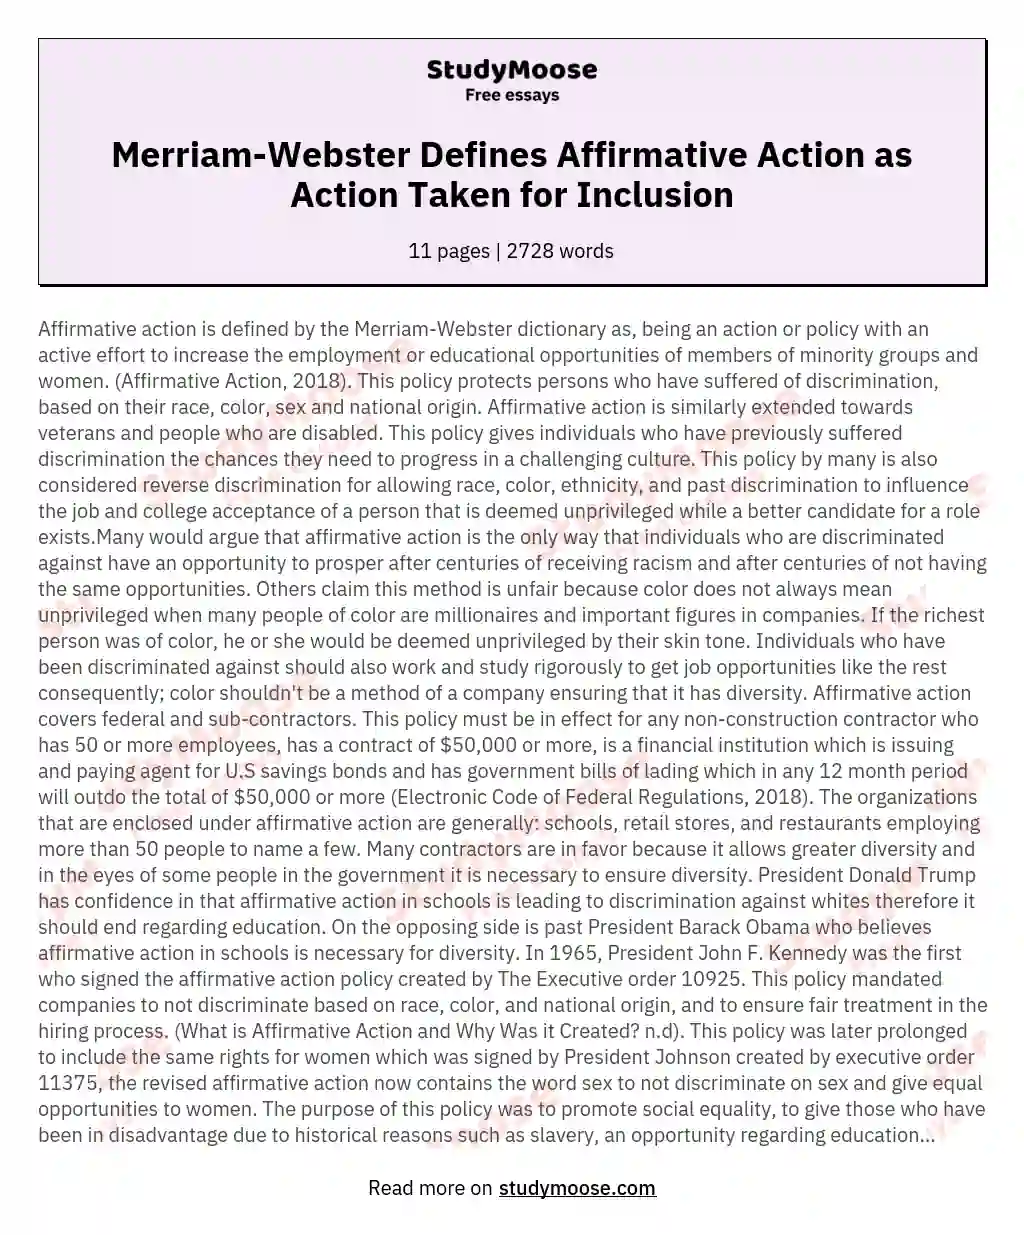 Affirmative action is defined by the MerriamWebster dictionary as being an action